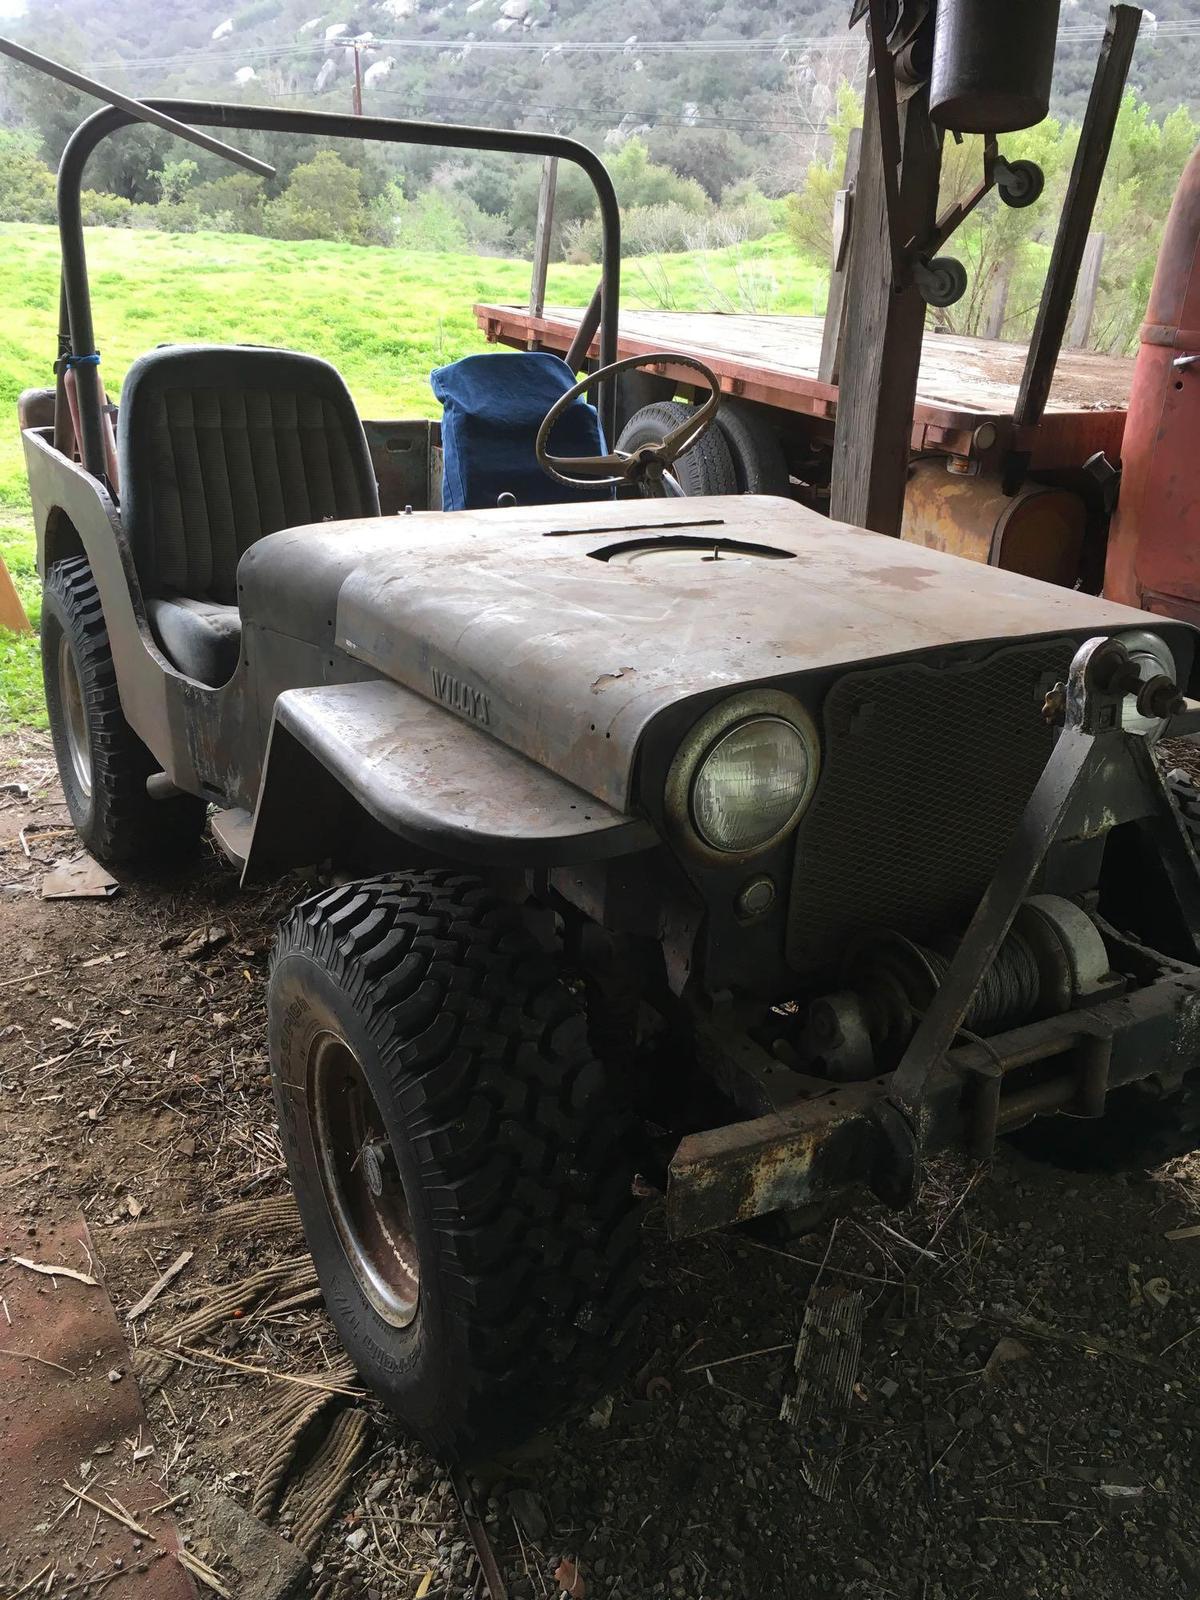 1940's Willys Jeep - SOLD ON BOS - MOTOR RUNS - Calif. DMV has no record for this vehicle